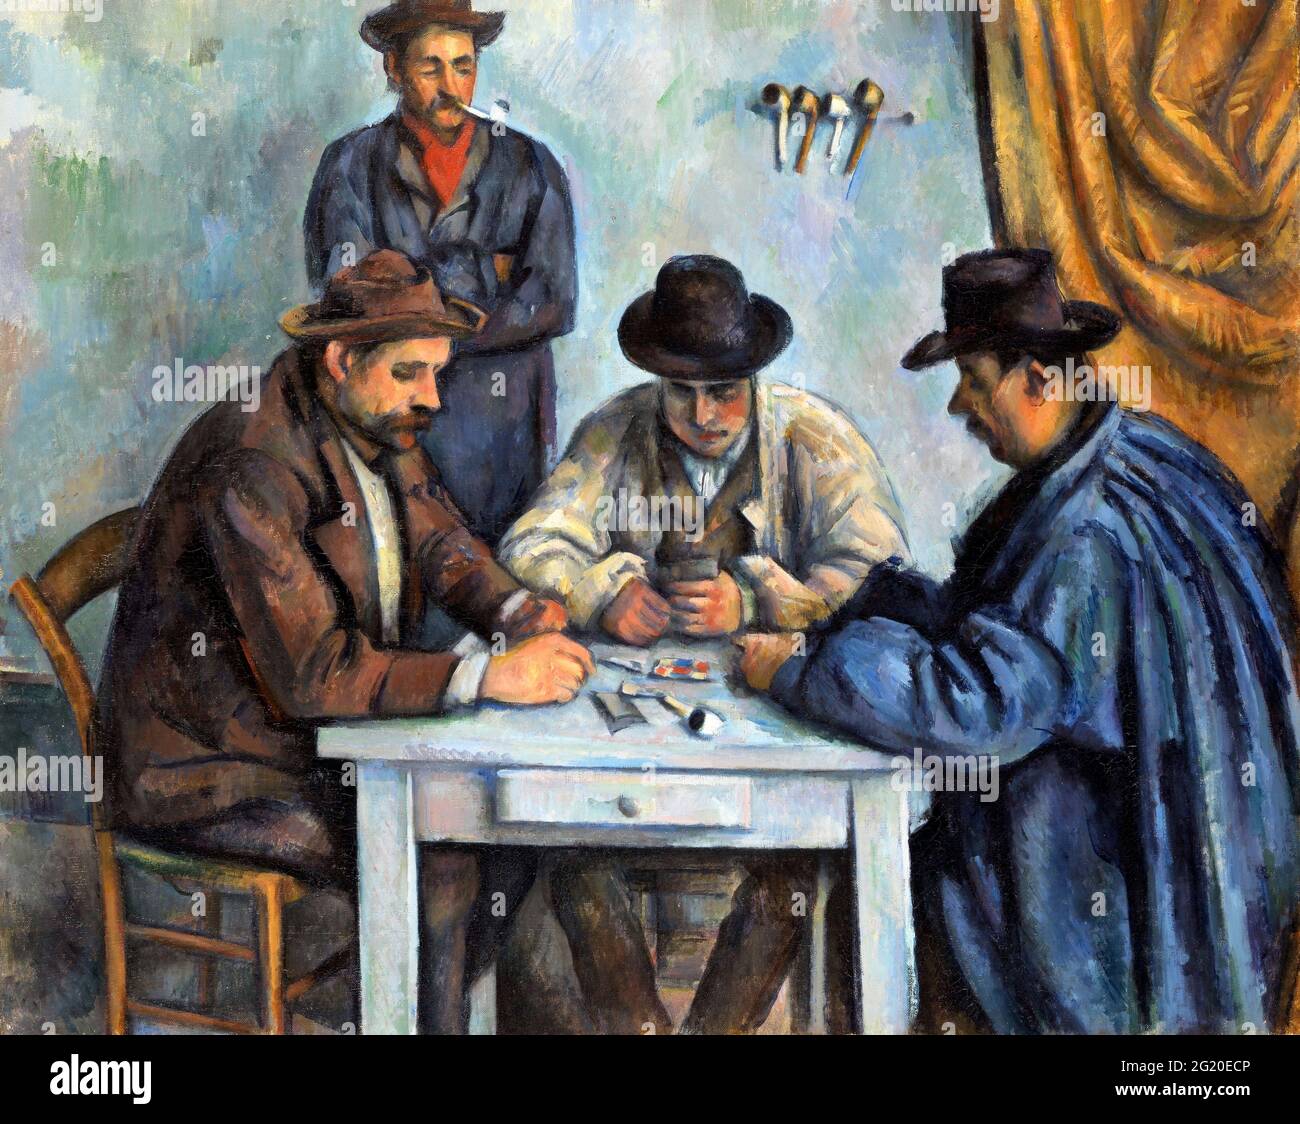 The Card Players by Paul Cezanne (1839-1906), oil on canvas, c.1890-92 Stock Photo